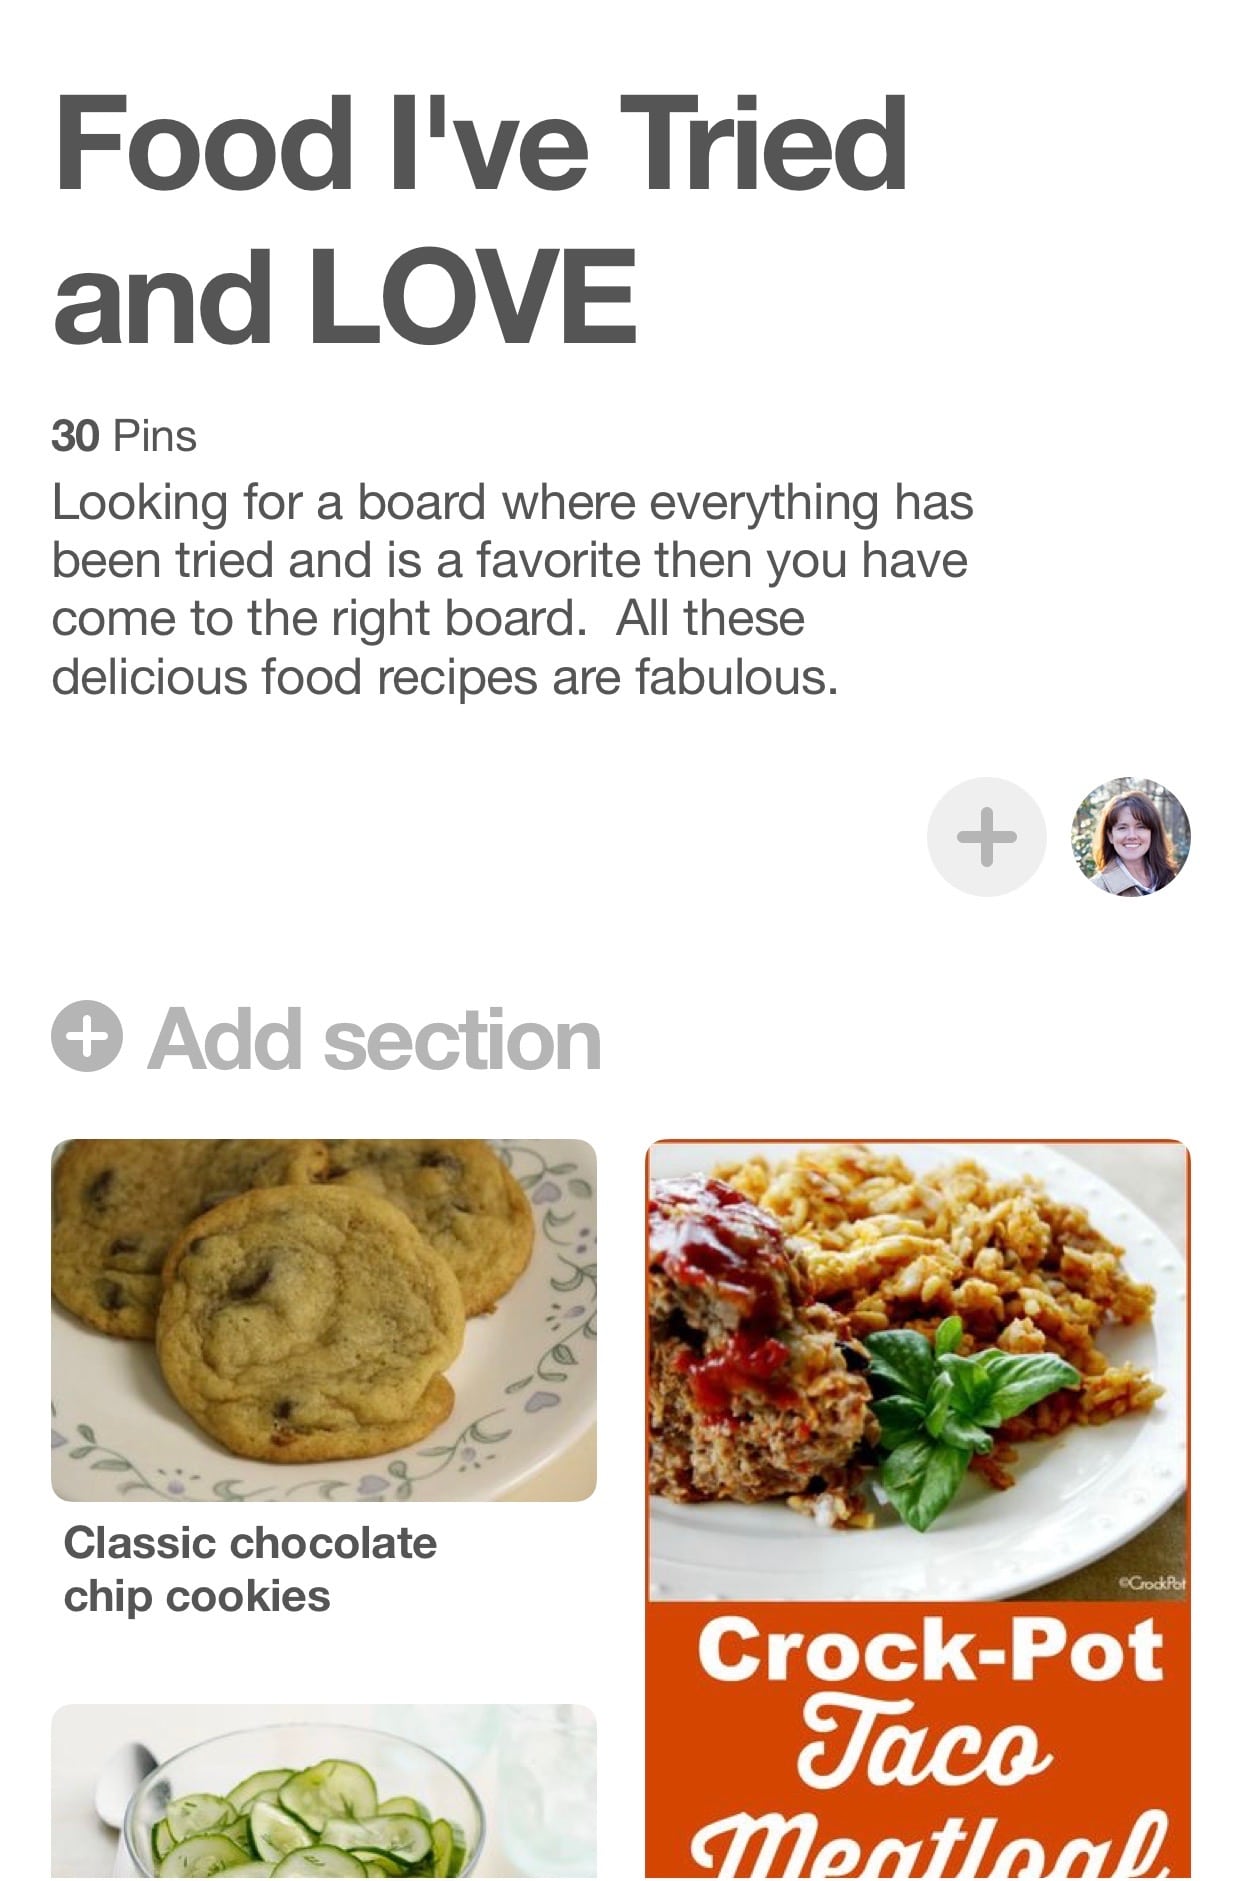 event planning checklist food I've tried and love pinterest board